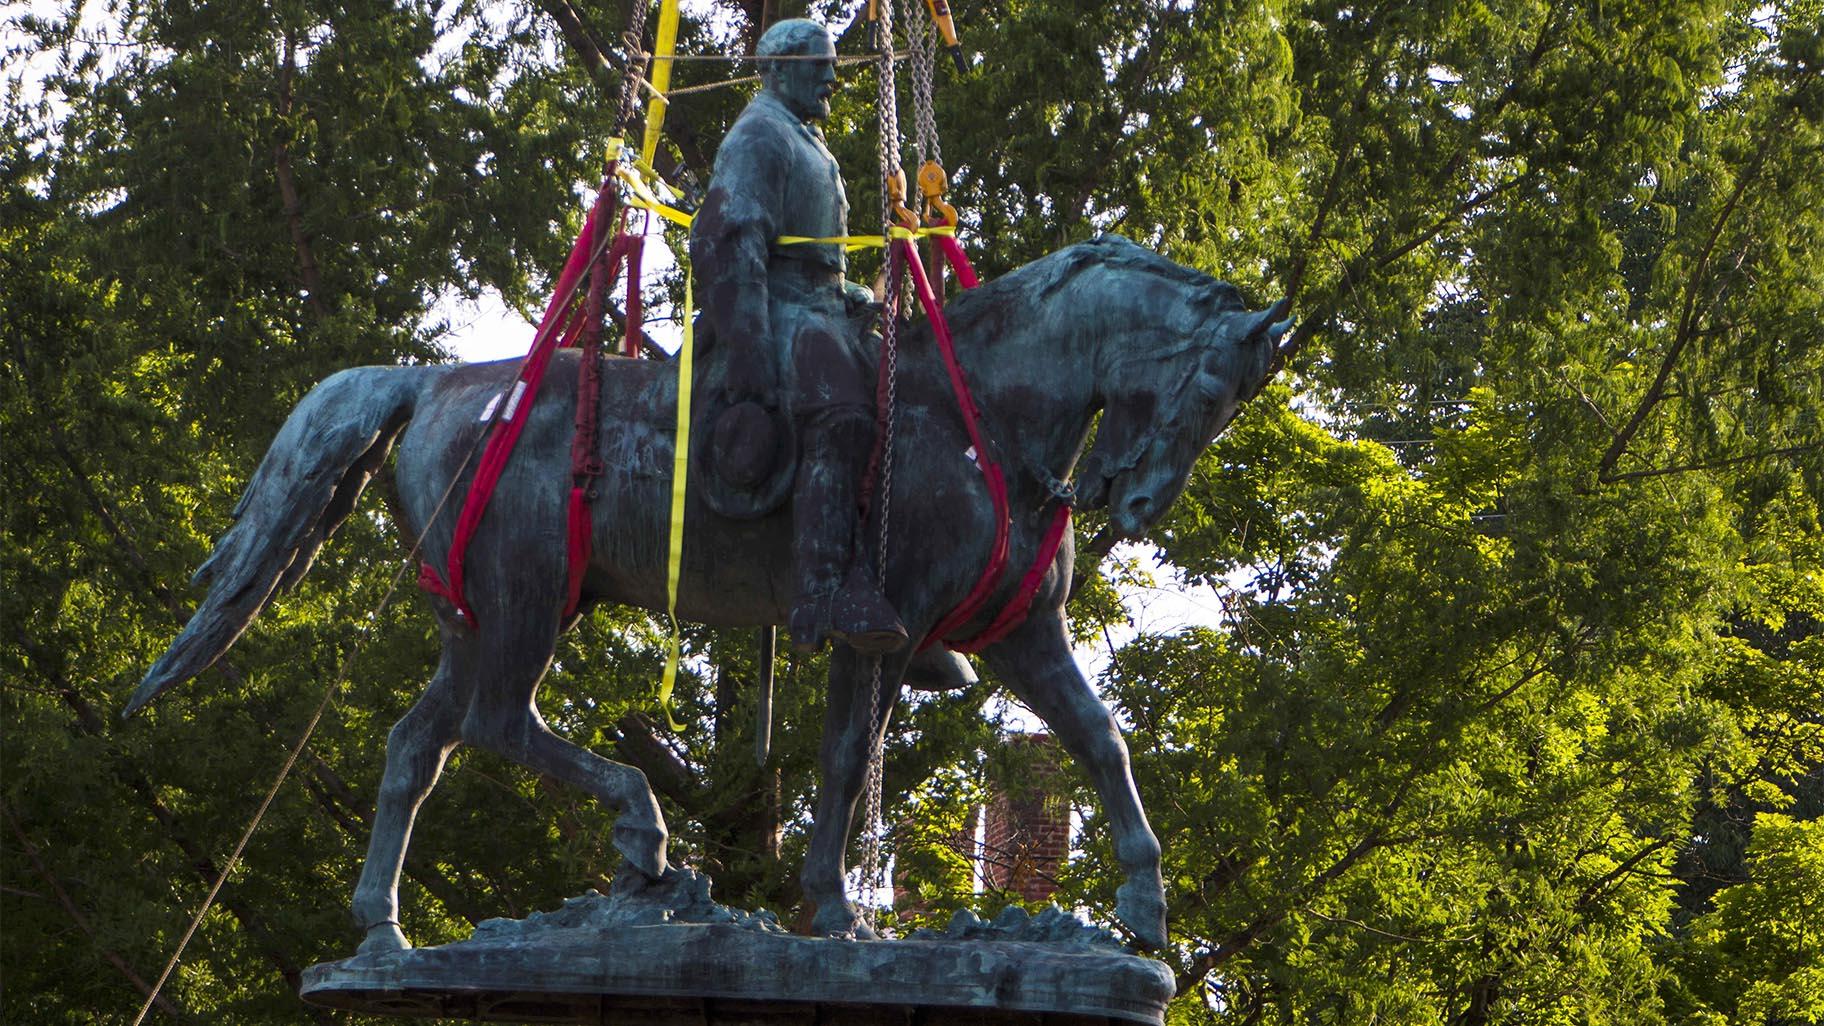 Robert E. Lee Statue Removed in Charlottesville | Chicago News | WTTW